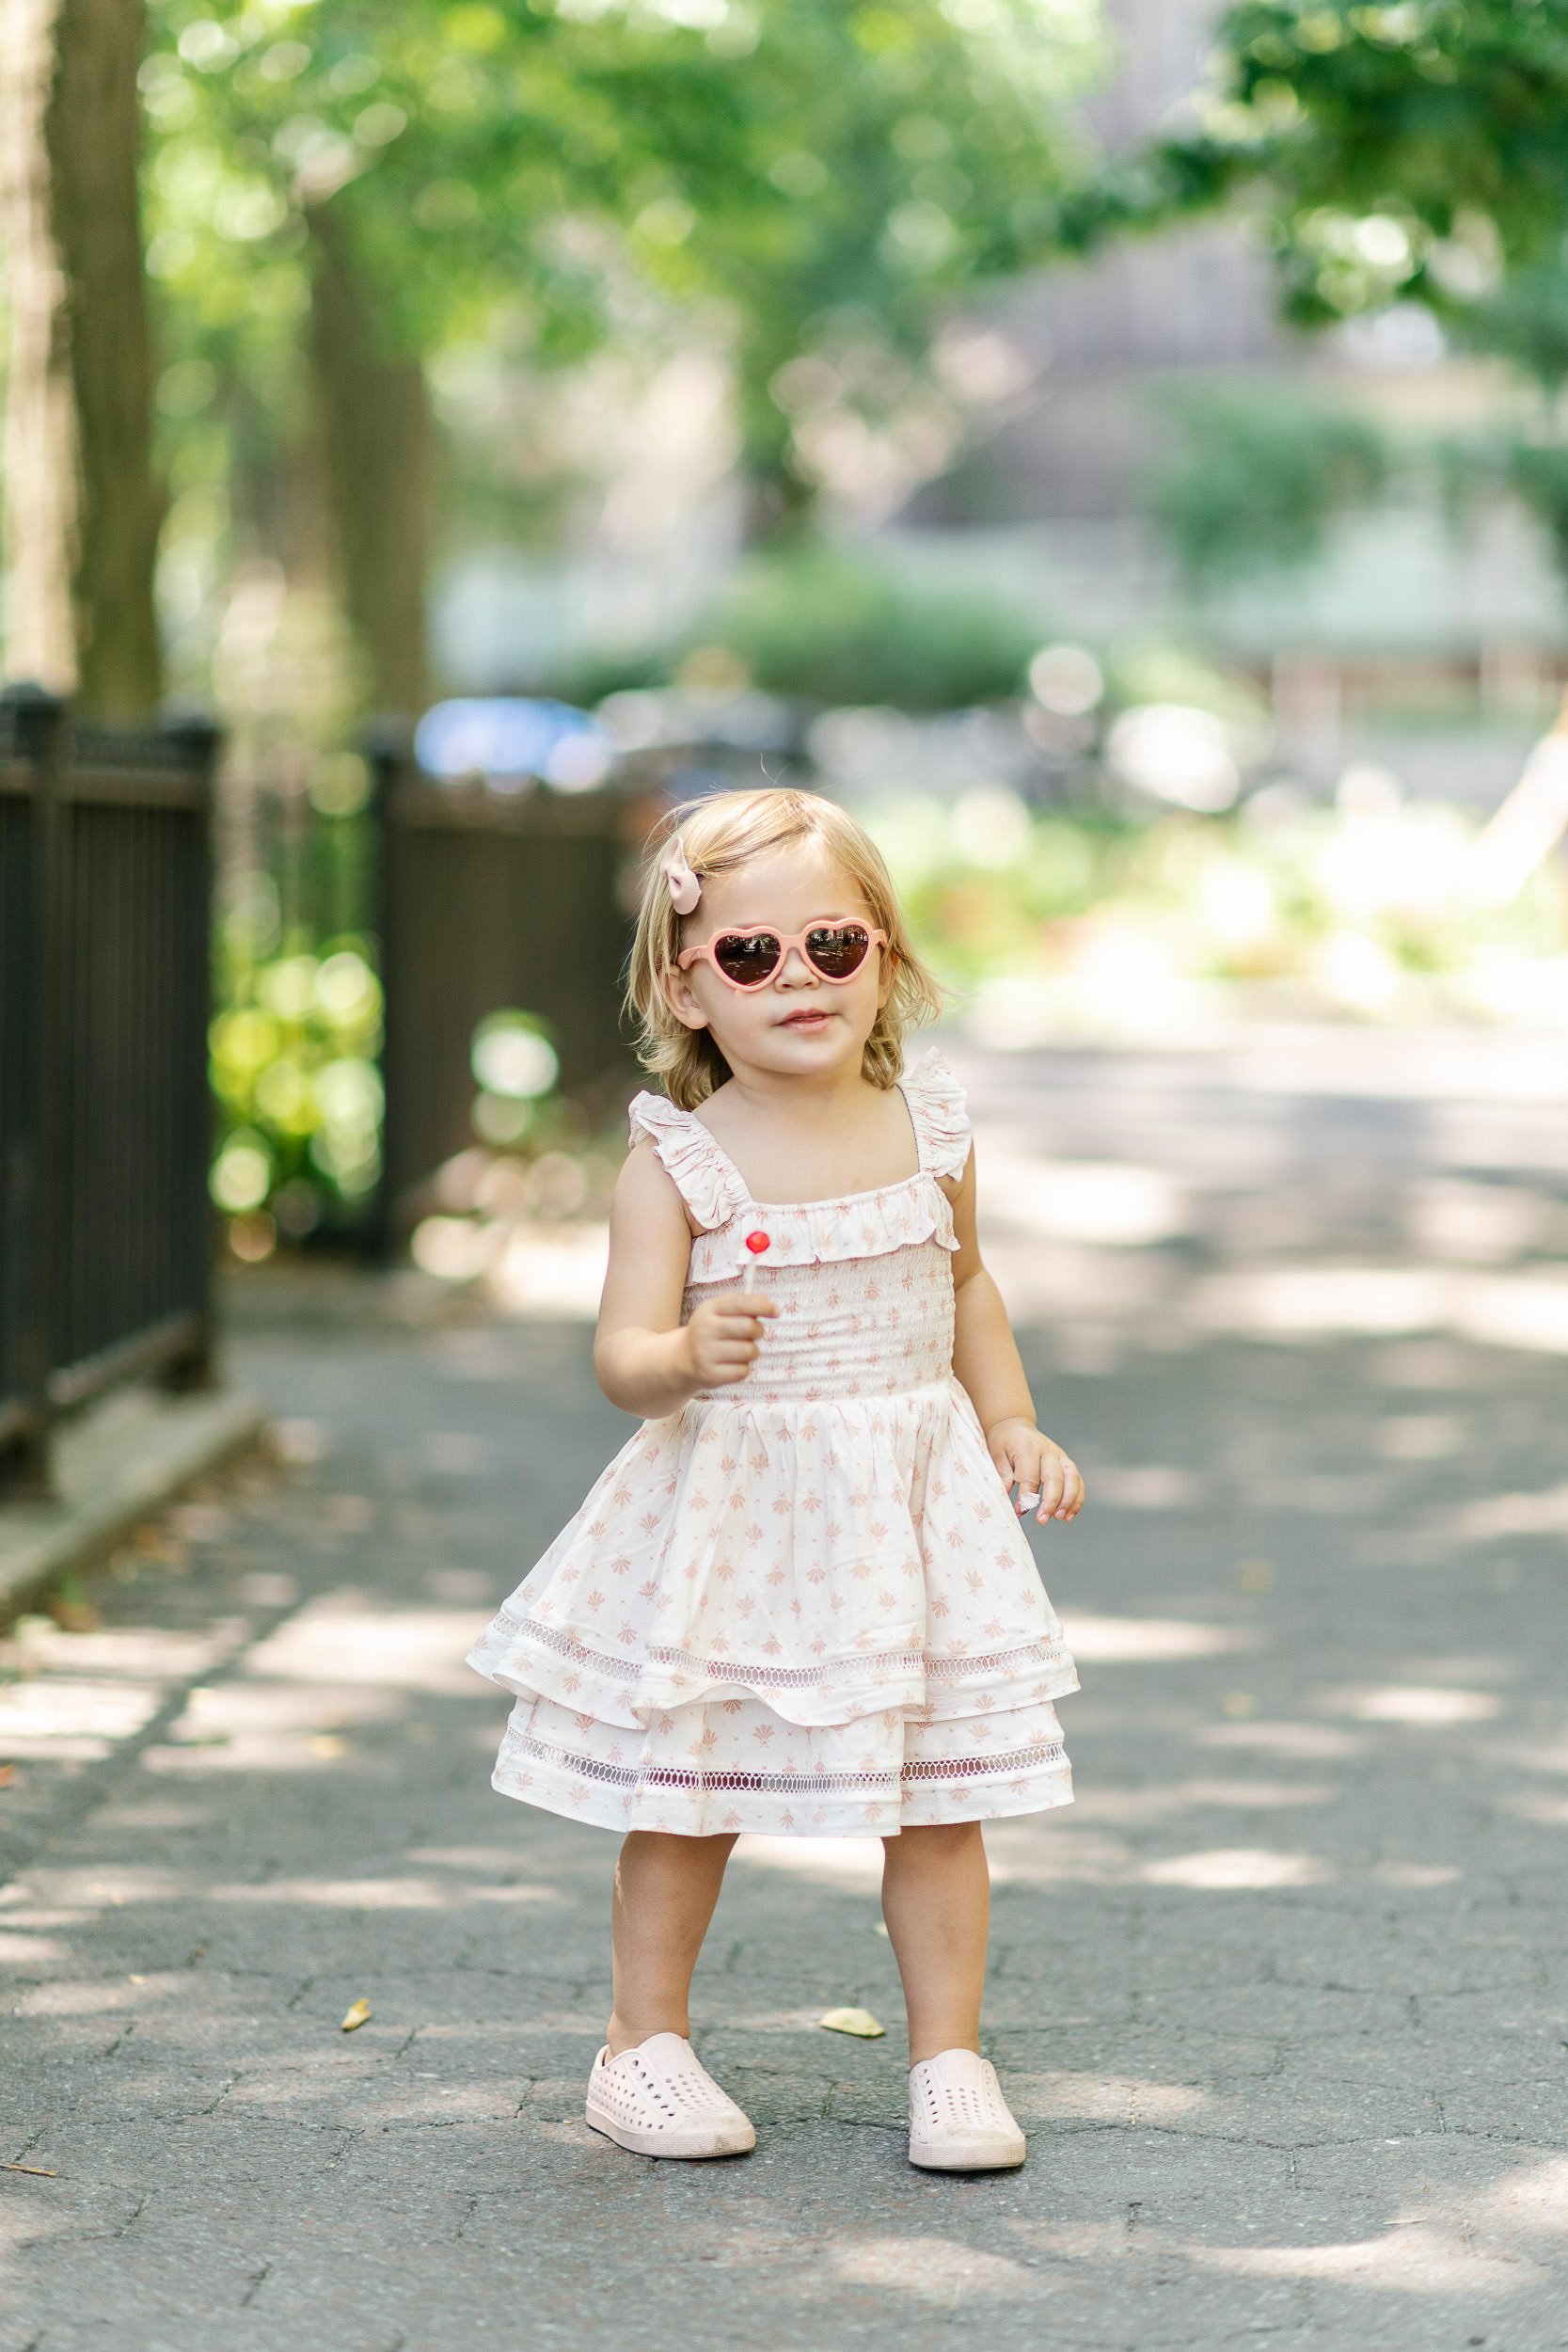  Nicole Hawkins Photography captures a clean and bright portrait of a little girl with a sucker in NYC. candid authentic #NicoleHawkinsPhotograaphy #NicoleHawkinsChildren #NewYorkPortraits #KidsinNewYork #ChildrensPortraits #lifestyleportraits 